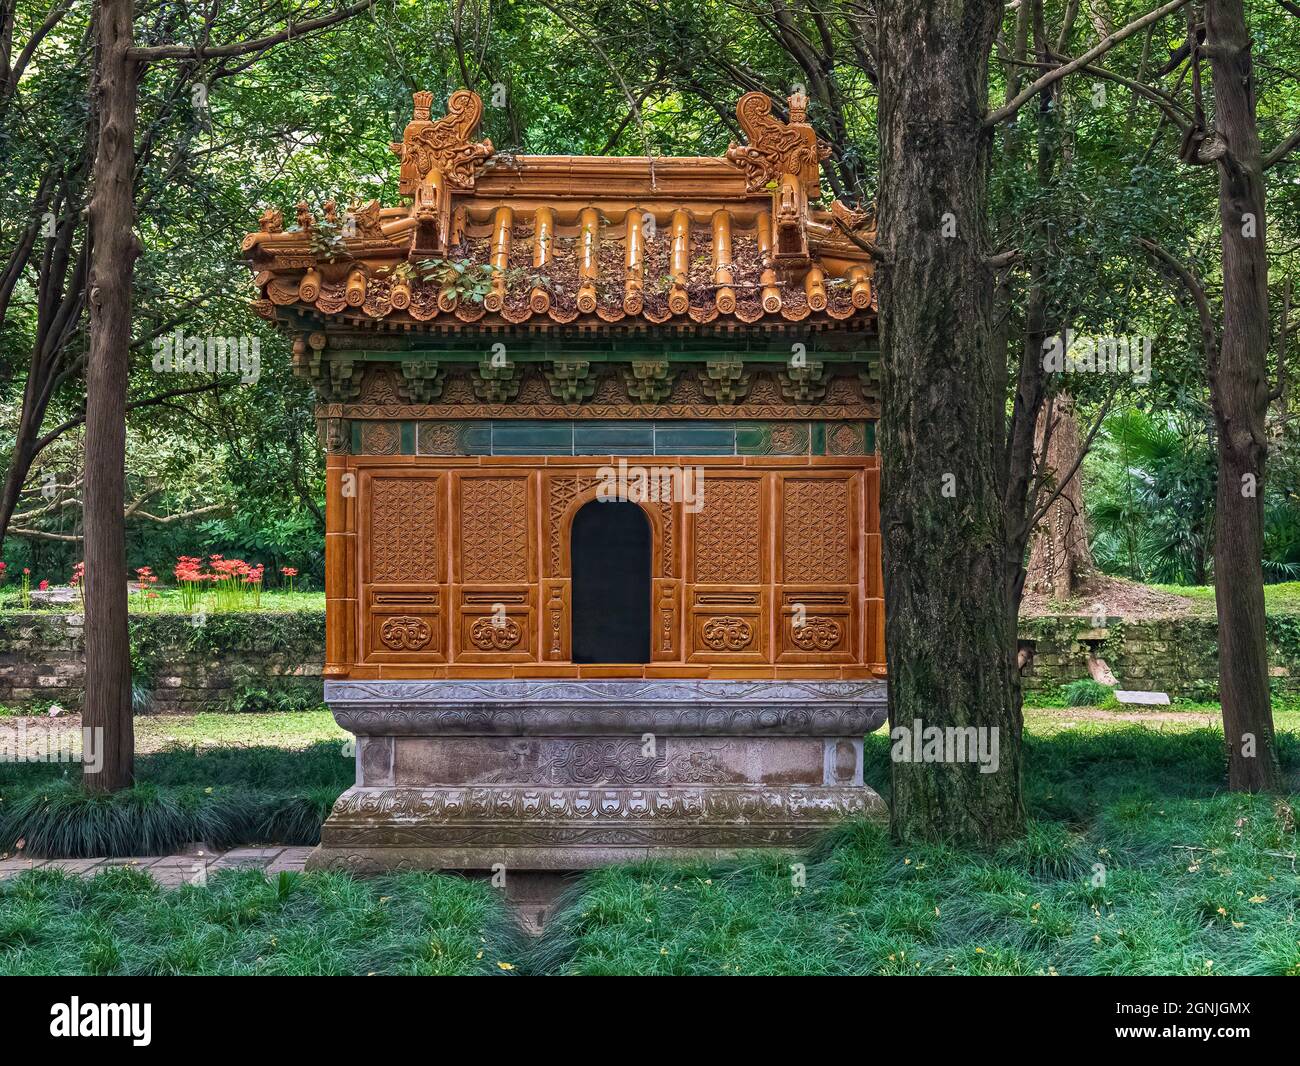 View of old building in the garden of the Ming Xiaoling Mausoleum, Nanjing, China, Asia, stock photo Stock Photo